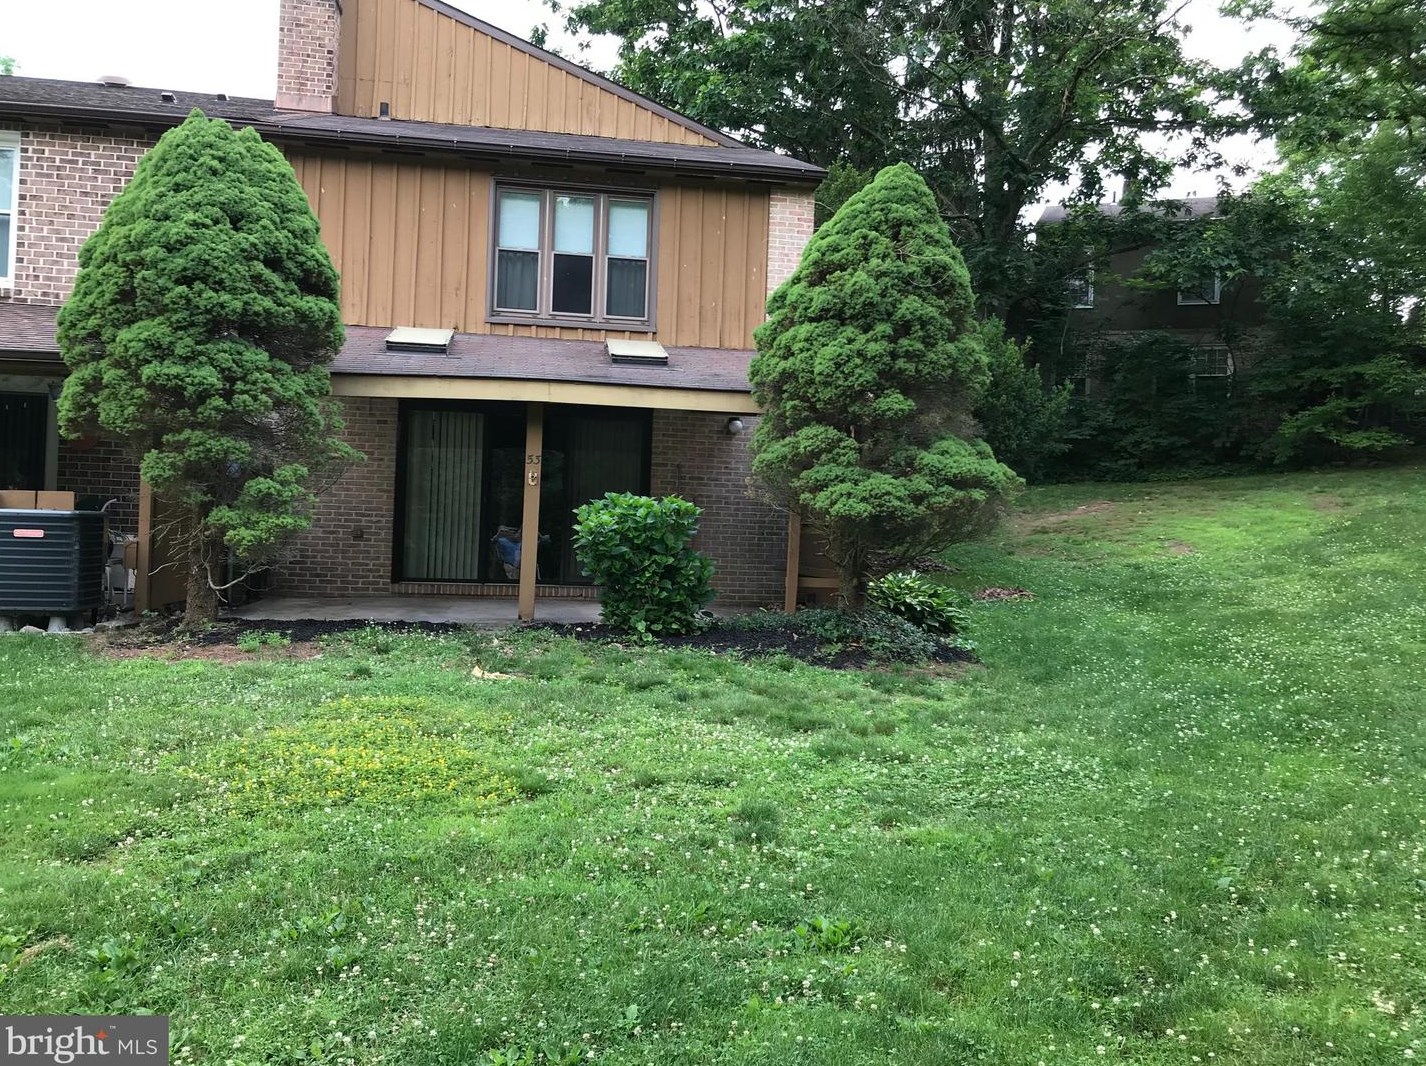 53 Winged Foot Dr, Reading, PA 19607-3410